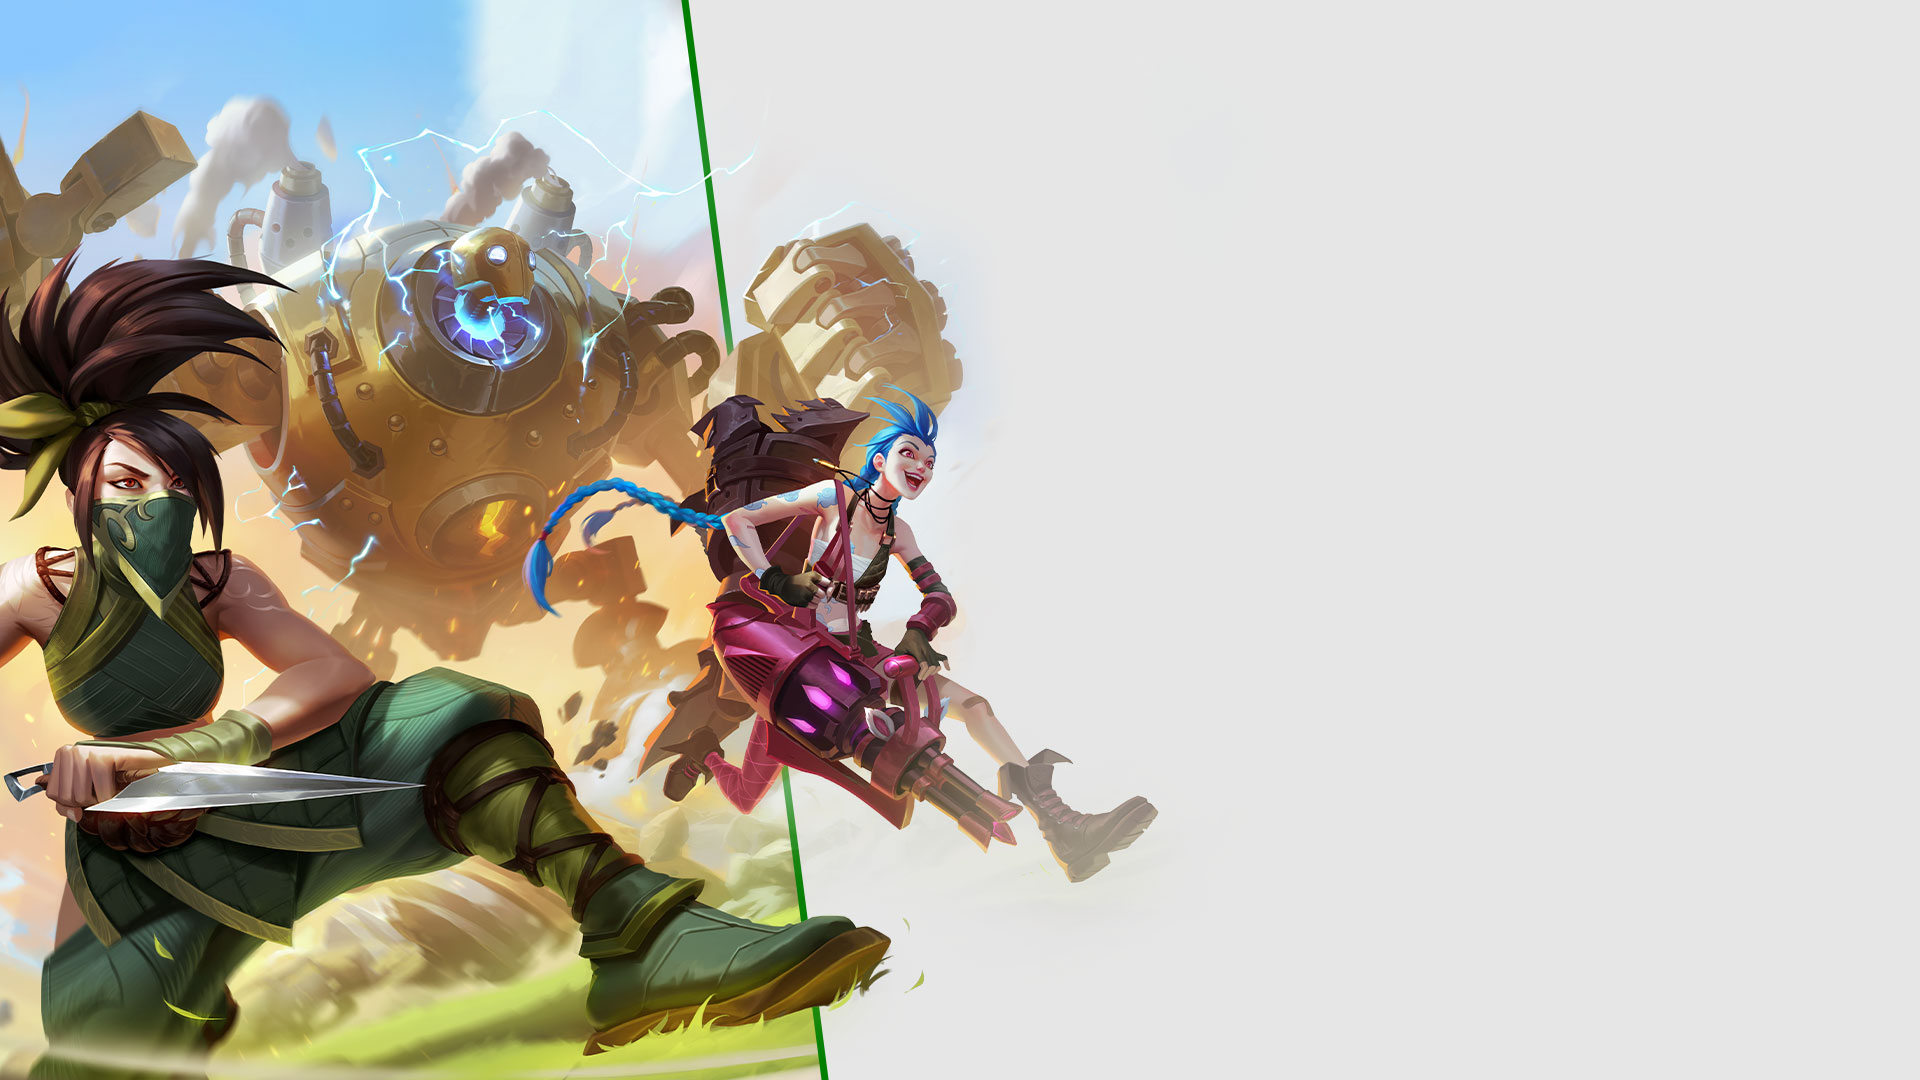 League of Legends: Wild Rift, a team of champions sprint across the battlefield to claim victory as they go up against enemy players.